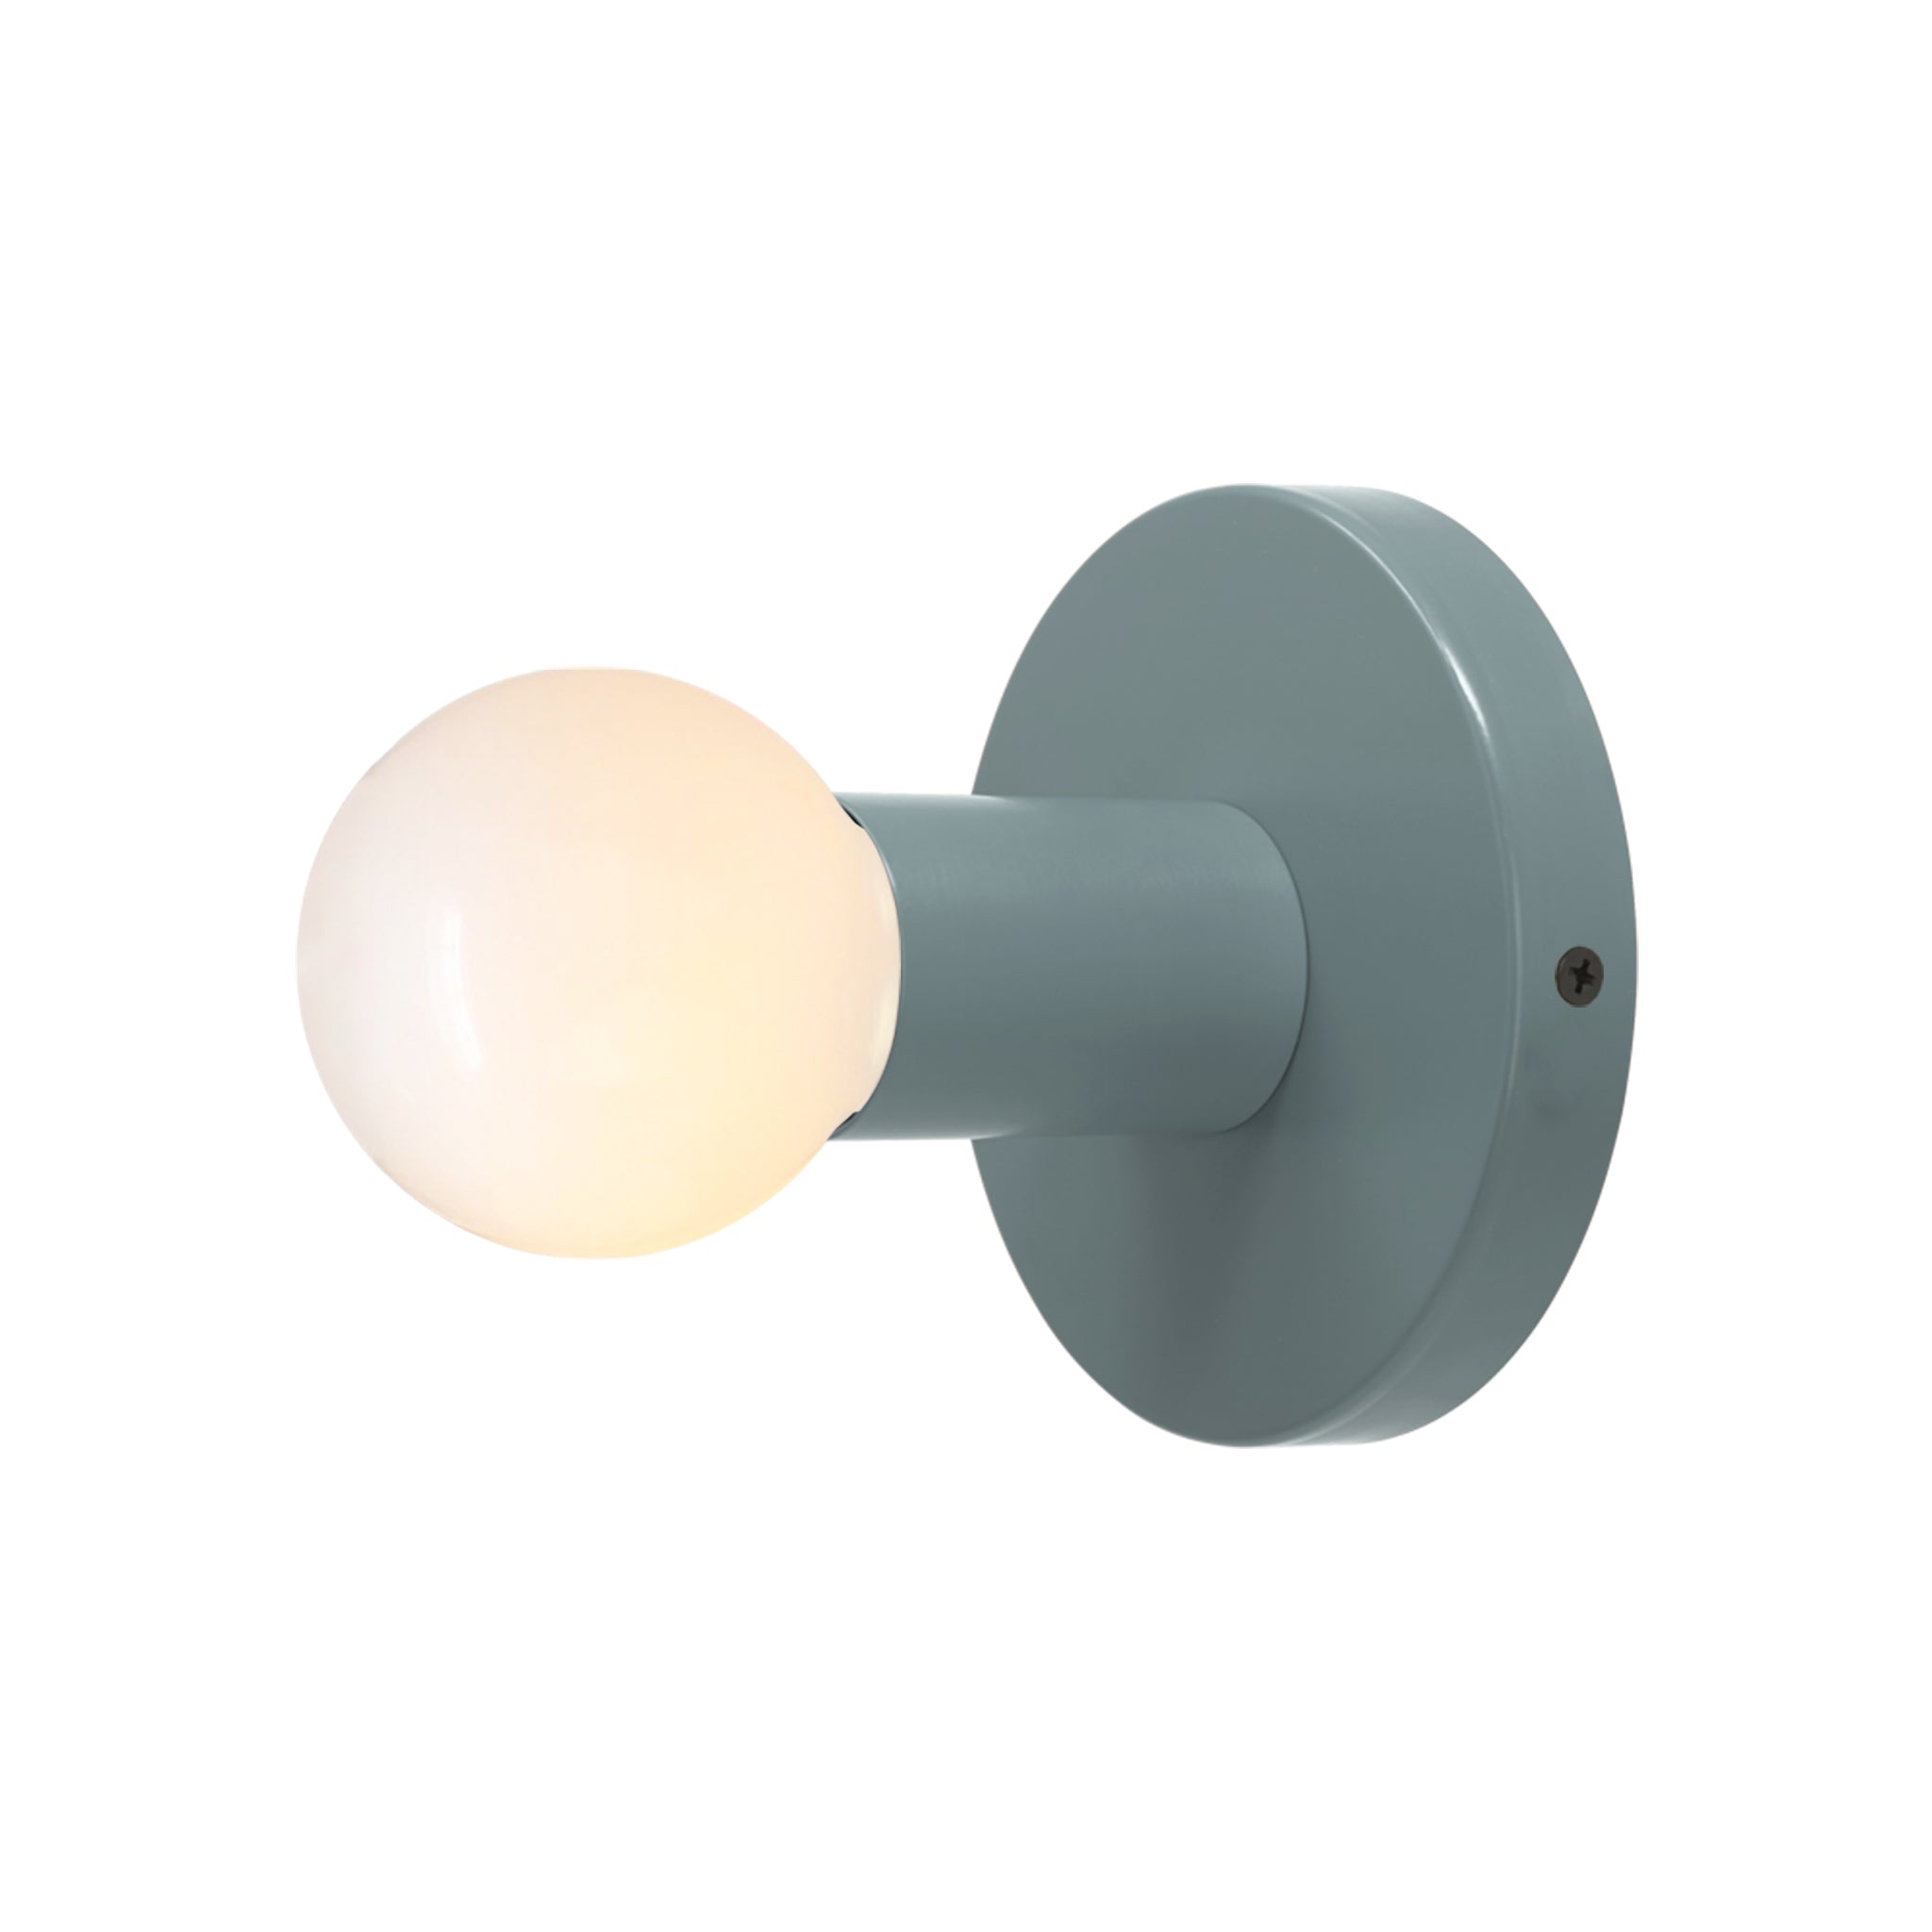 Black and lagoon color Twink sconce Dutton Brown lighting